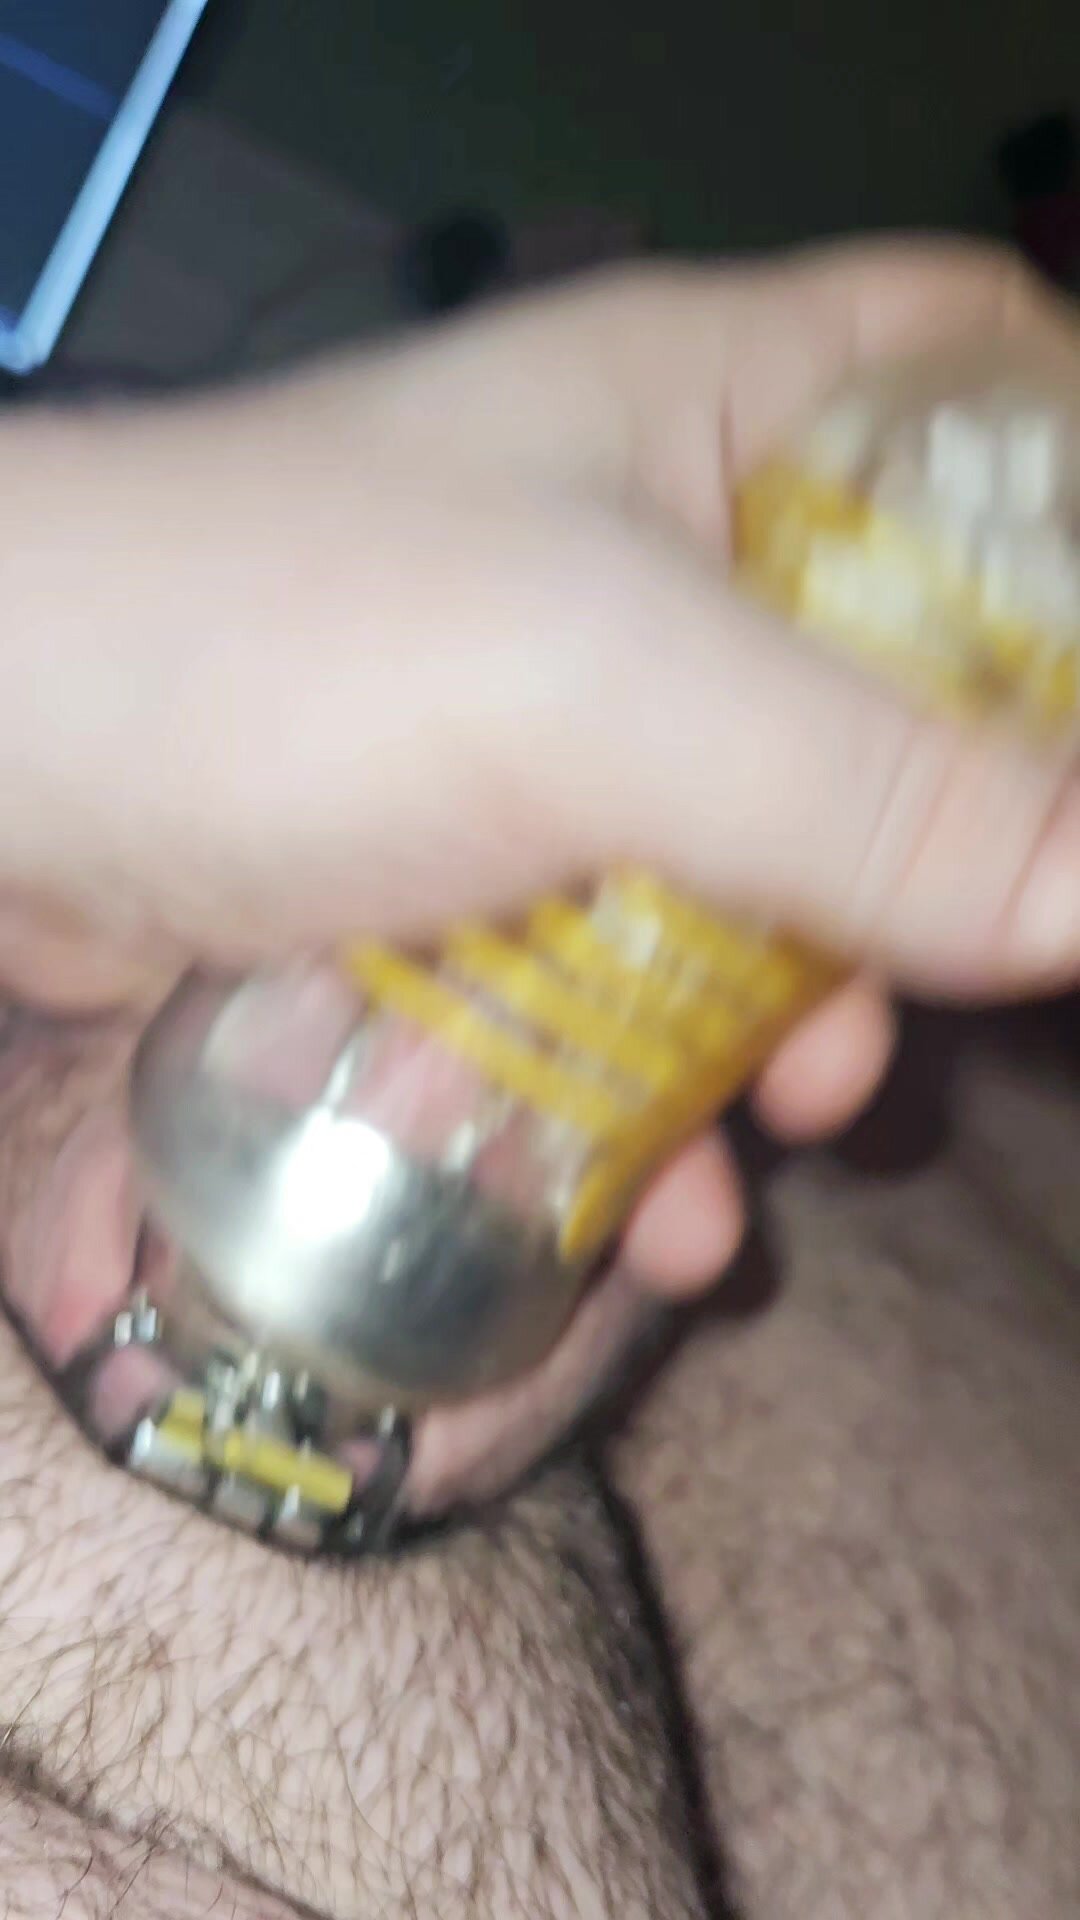 Locked Fag Gives Itself a Ruined Orgasm